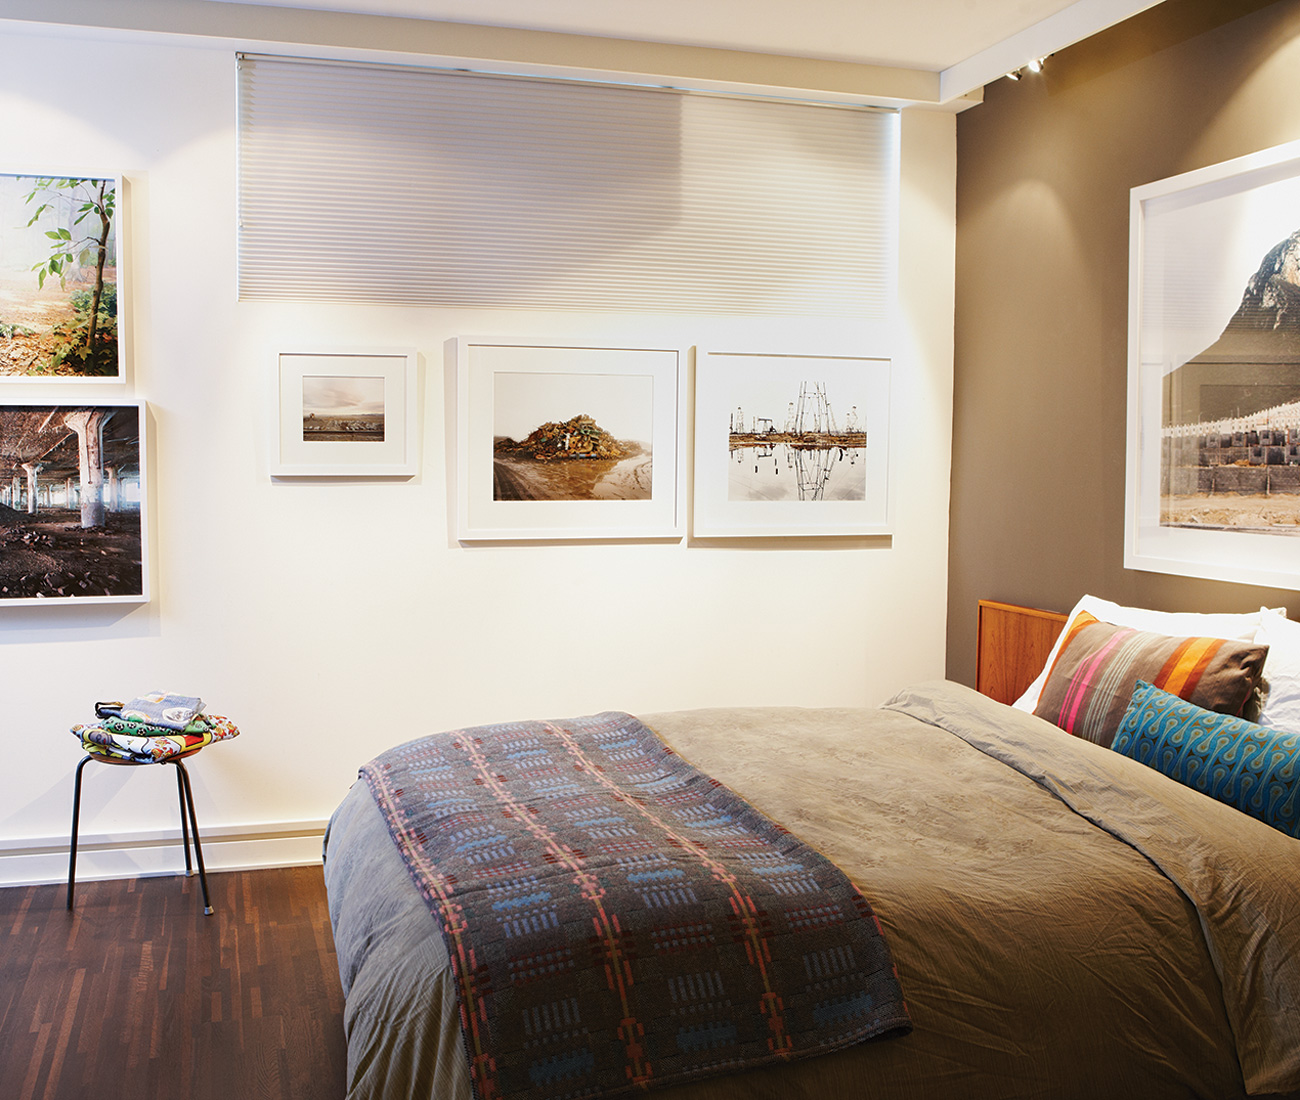 Photos by Corine Vermeulen-Smith and Edward Burtynsky, among others, hang in the master bedroom. Photo by Naomi Finlay.